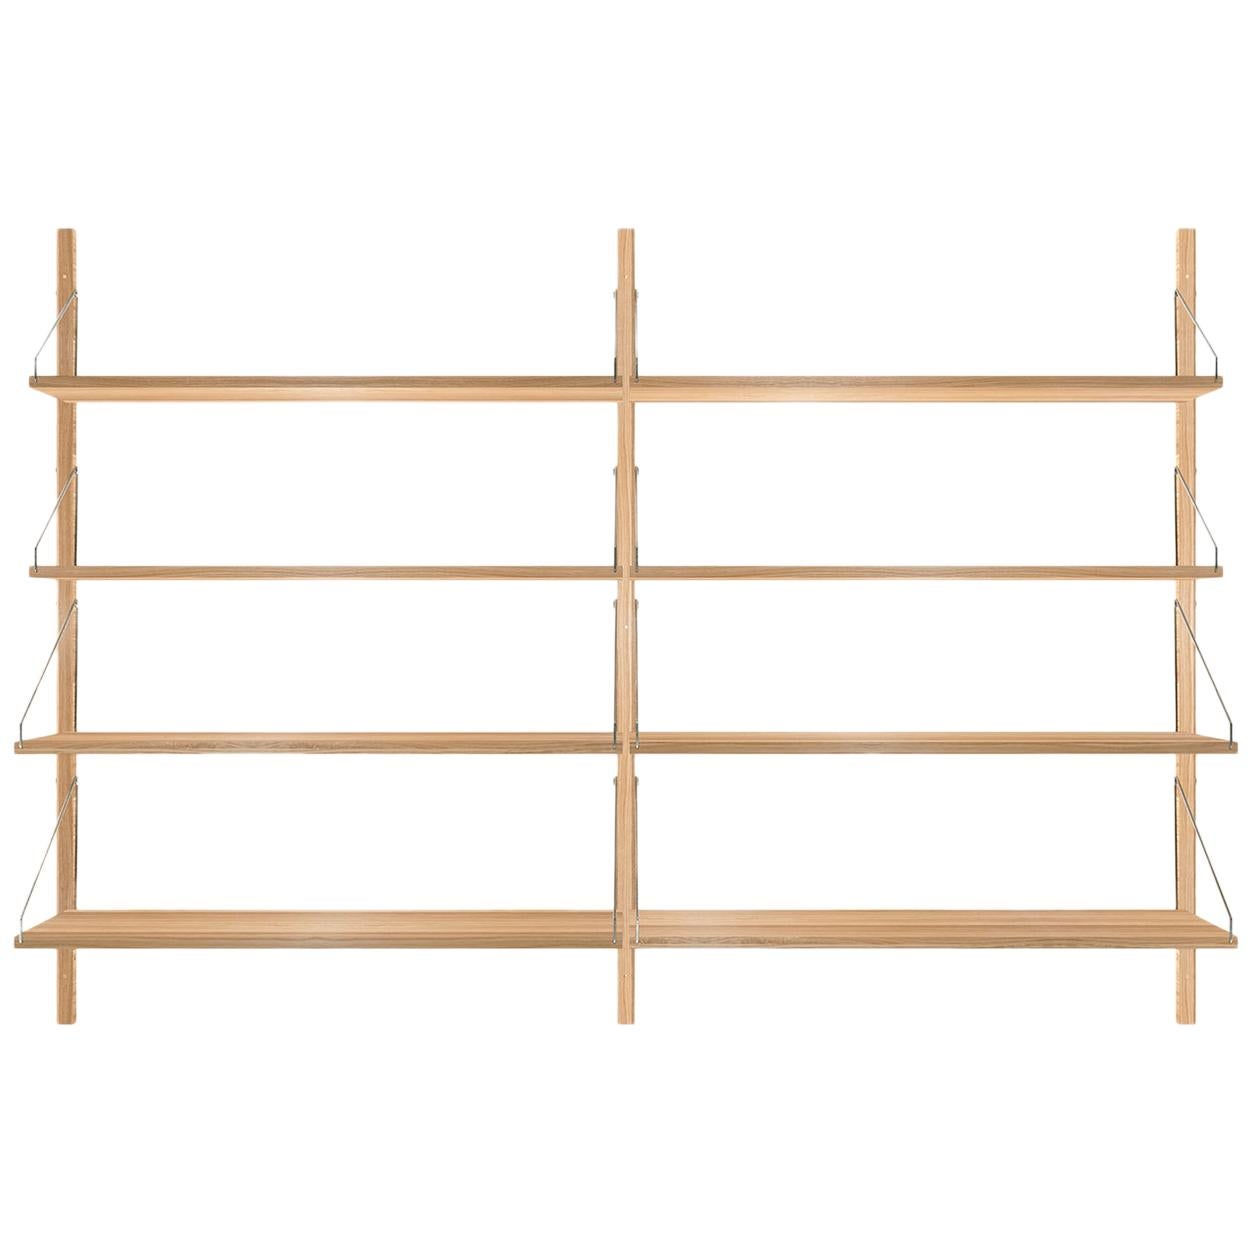 Frama Contemporary Minimal Design Wooden Wall Shelf Library Double Section